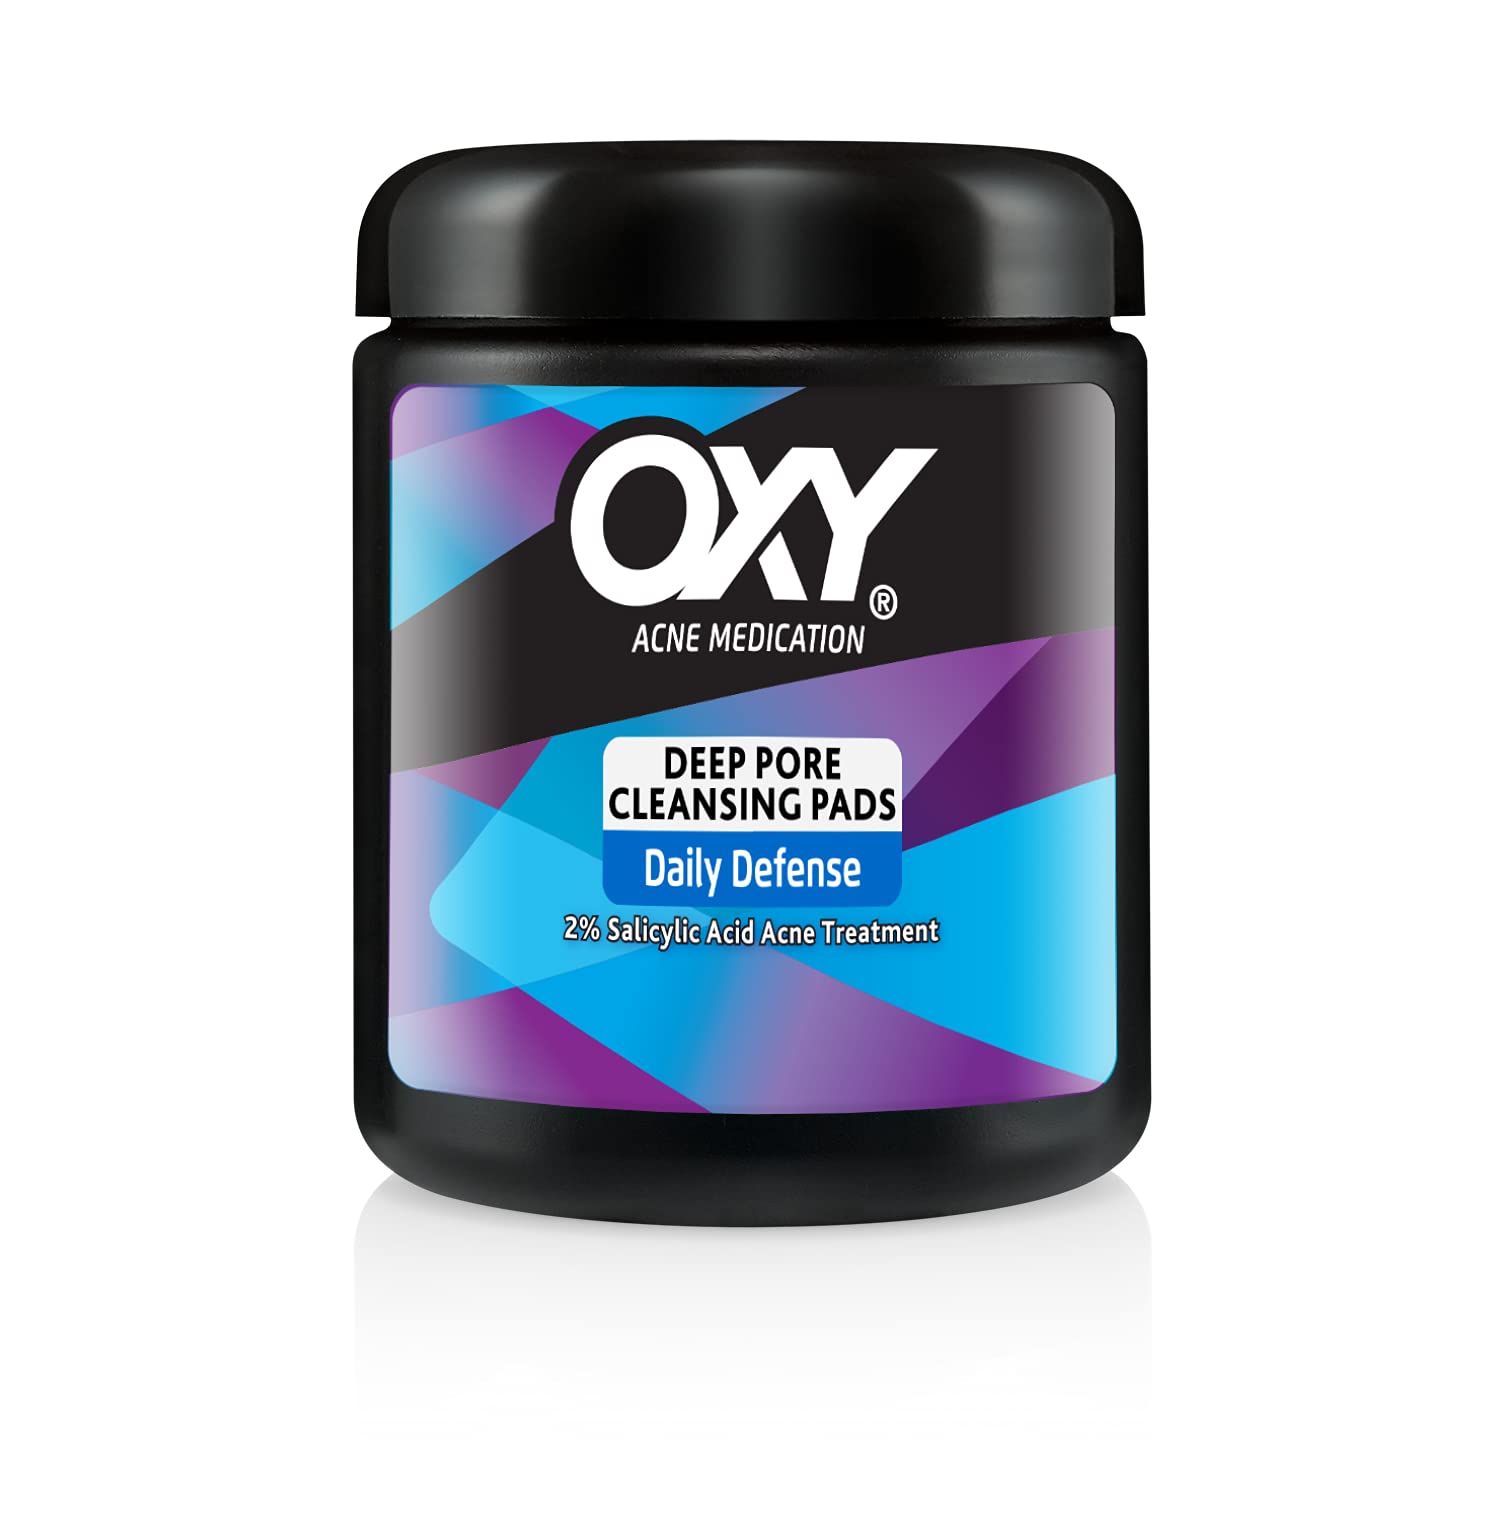 Oxy Daily Defense Cleansing Pads, 90 Count